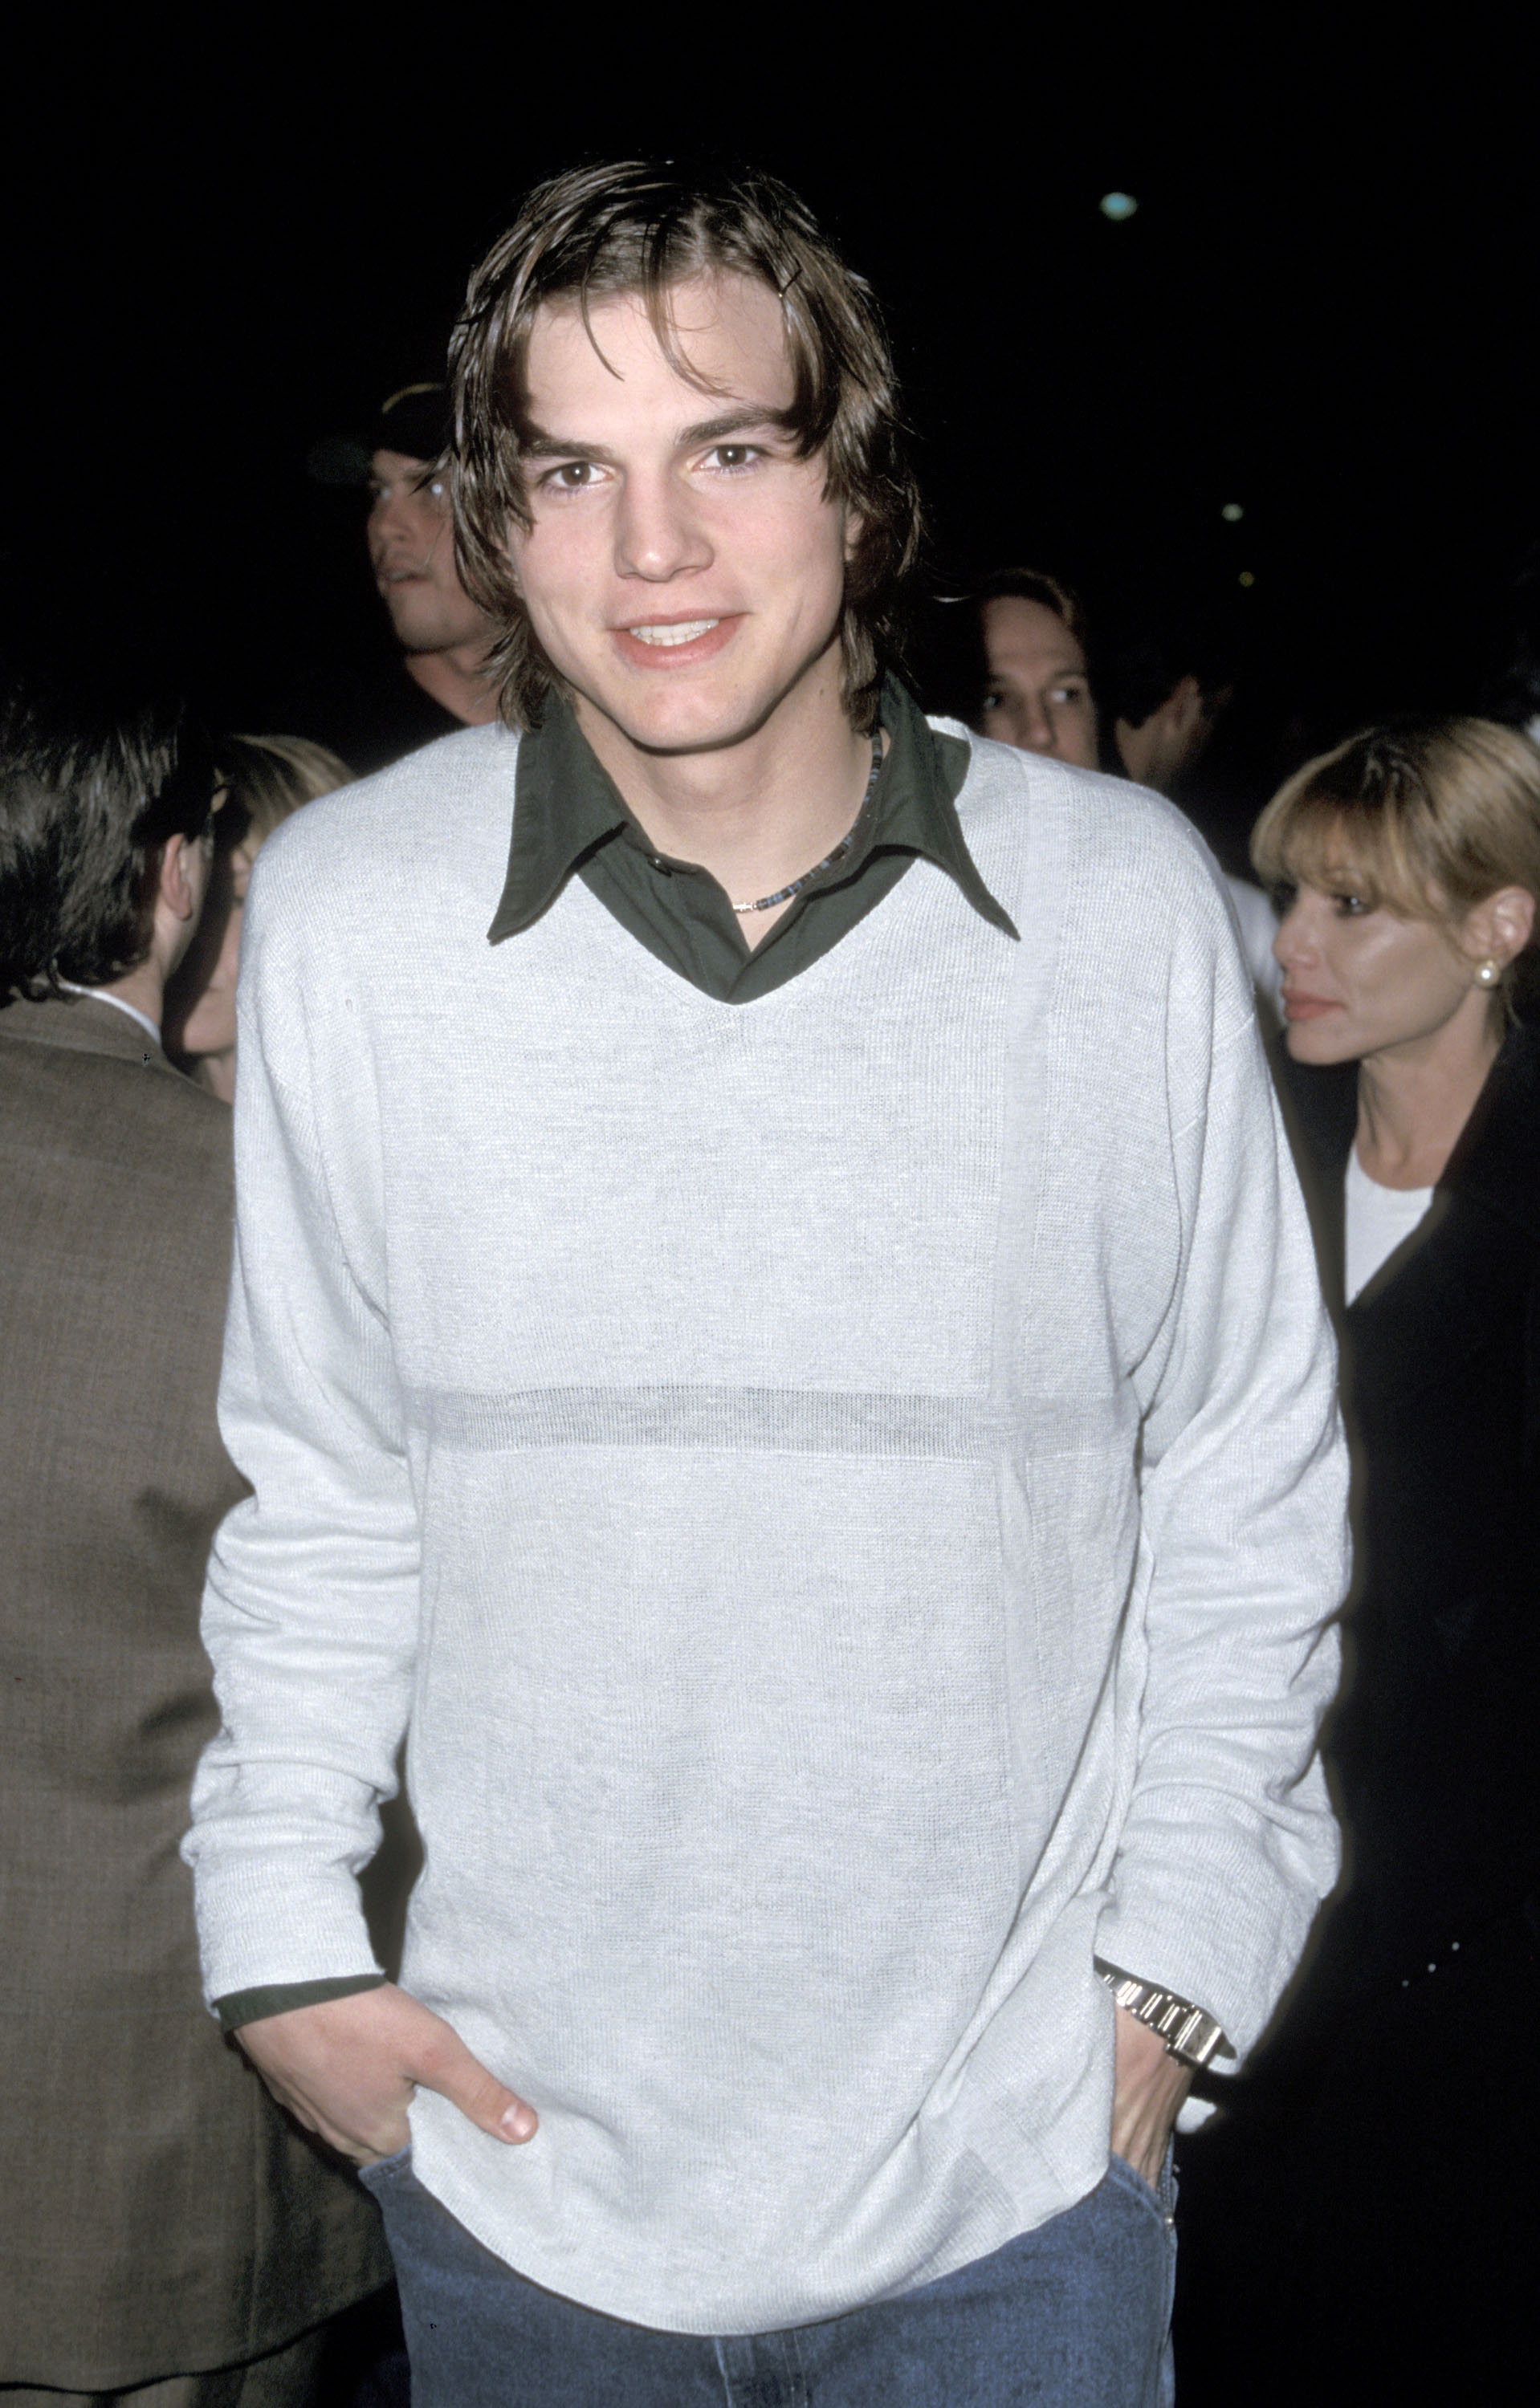 Ashton Kutcher during the premiere of "Varsity Blues" in Hollywood, California, in 1999. | Source: Getty Images